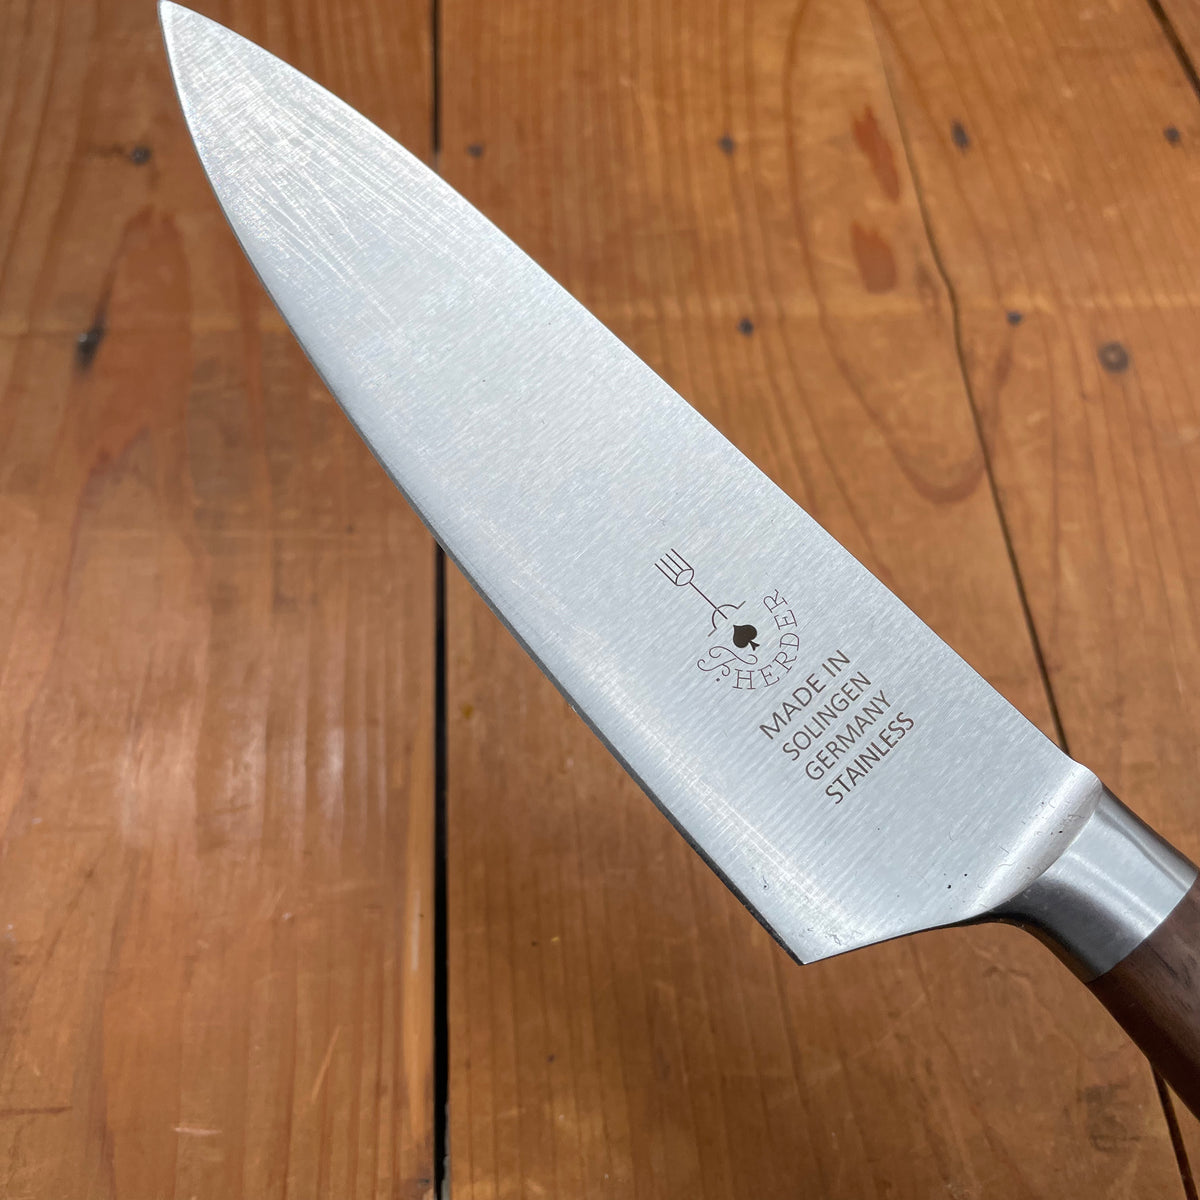 Friedr Herder Madera 6" Chef Forged Stainless Walnut 1/2 Bolster